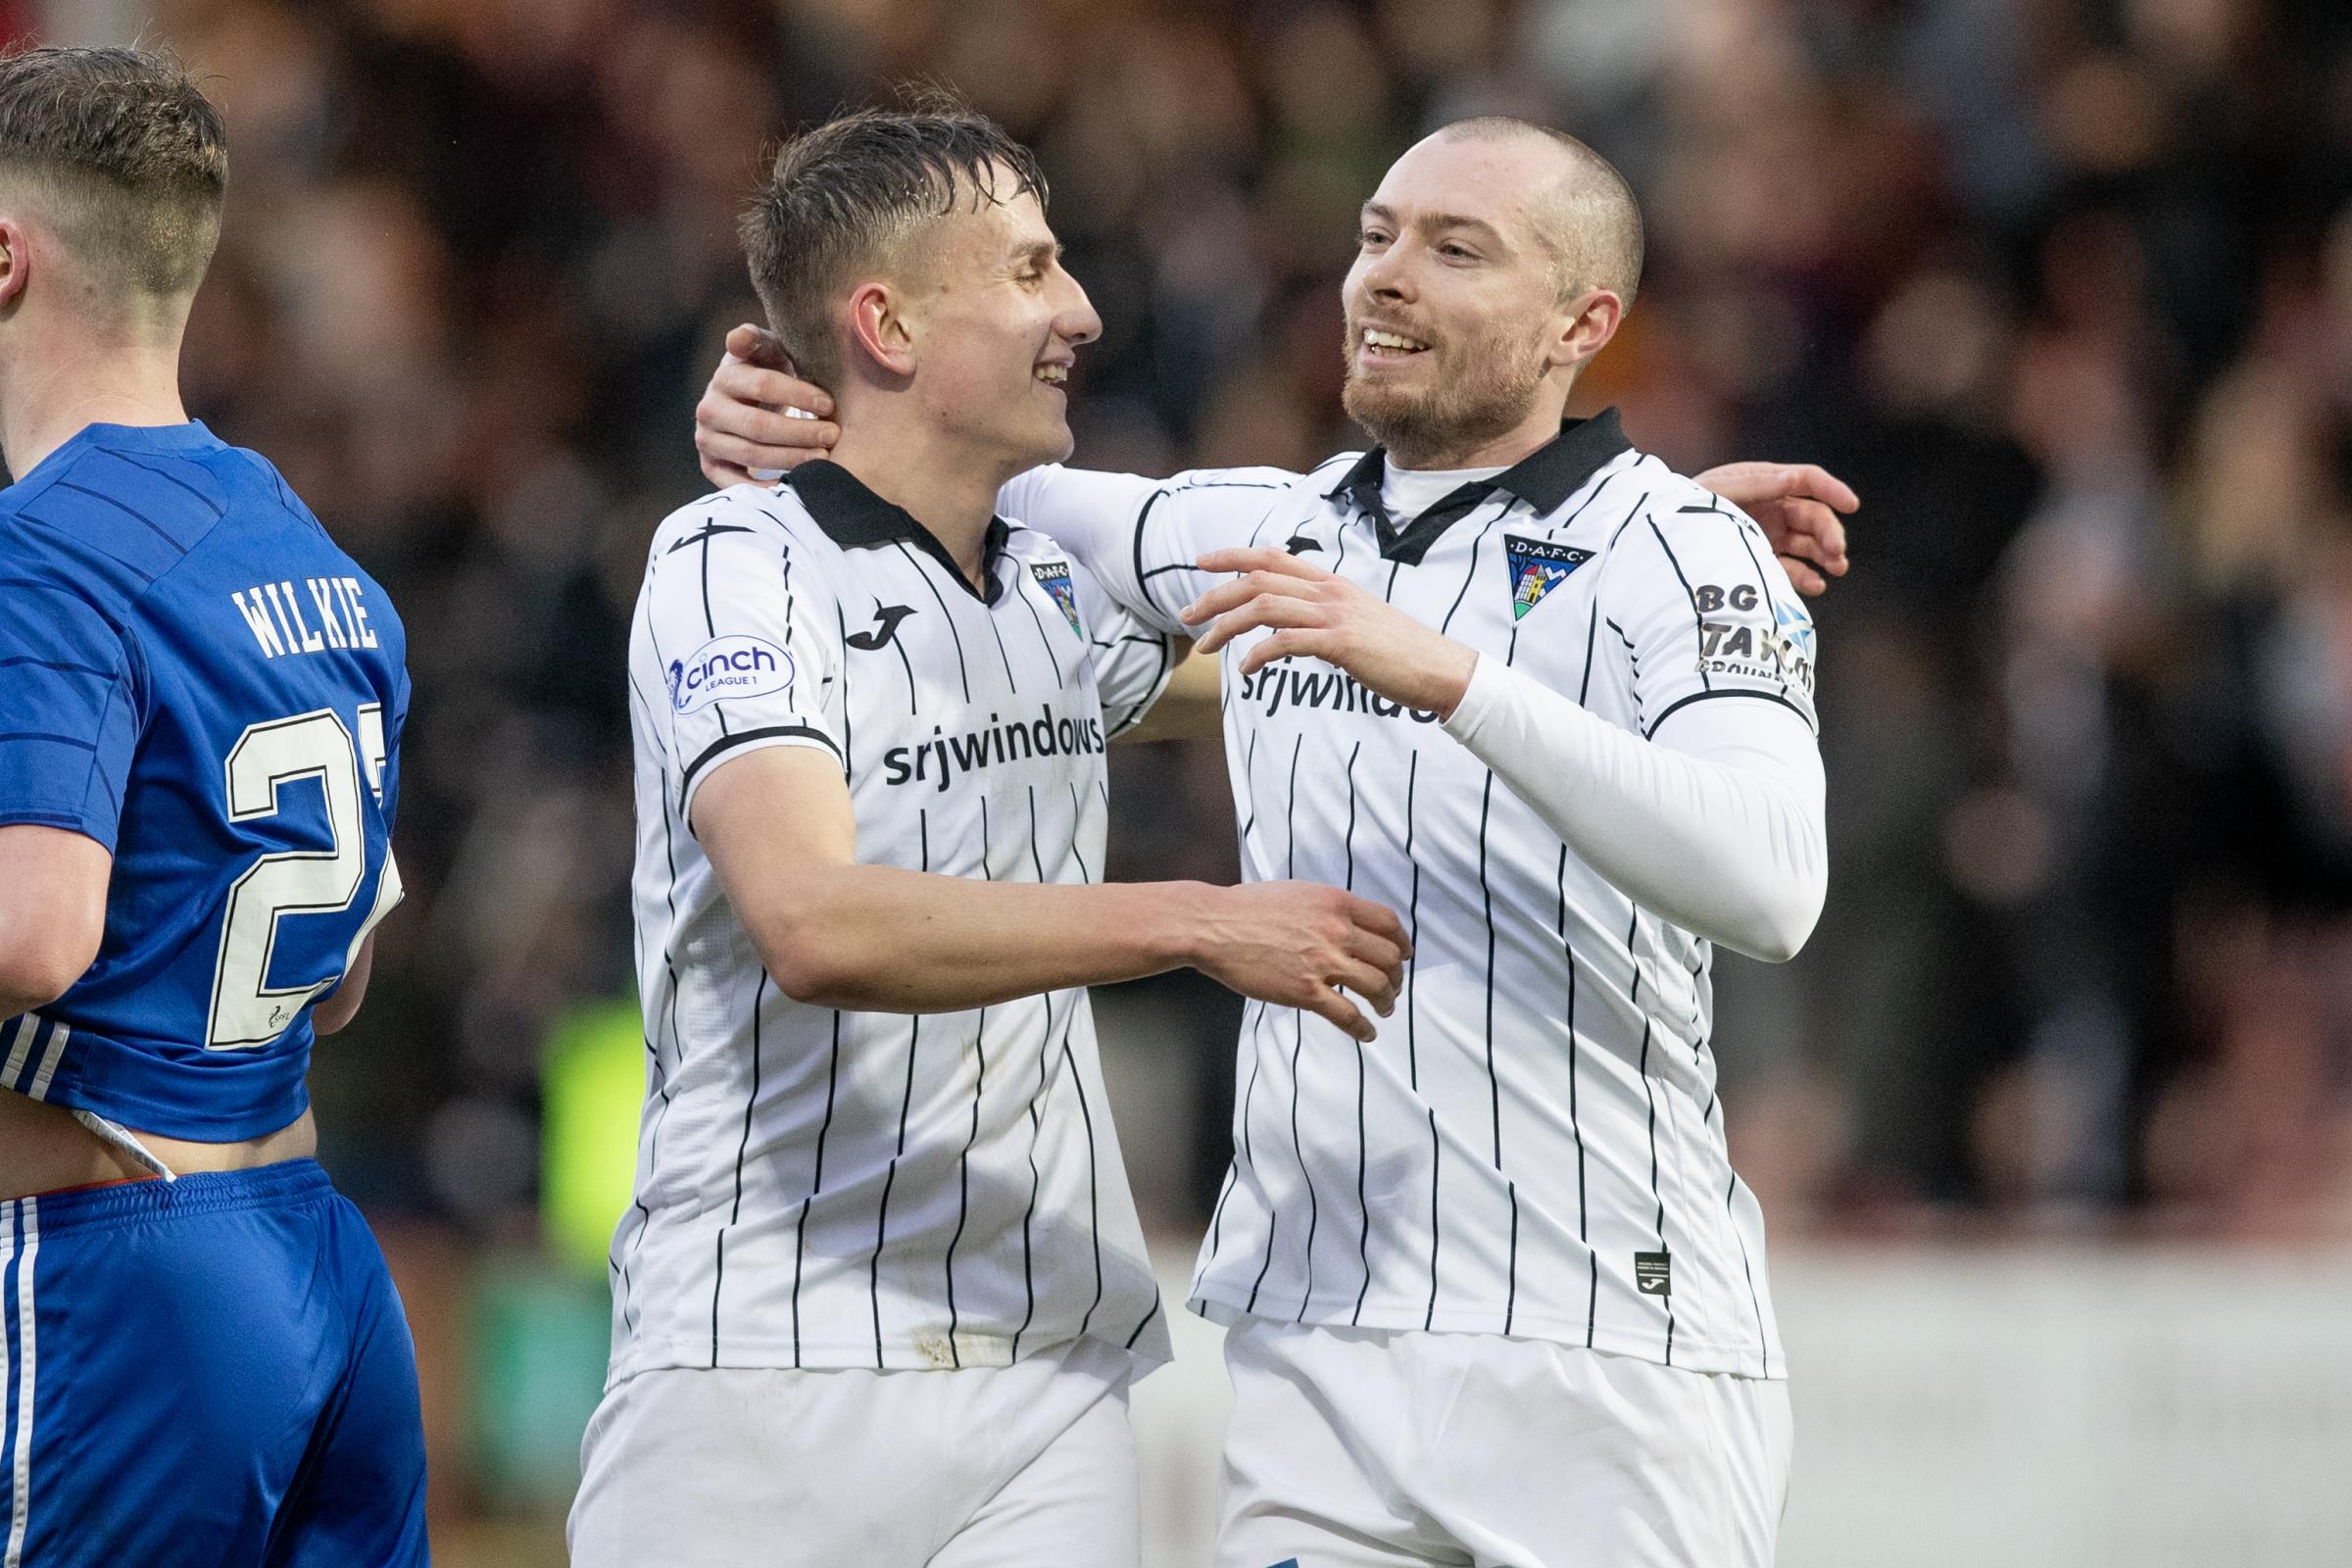 Dunfermline v Peterhead: Dave Mackay praises leaders after home win